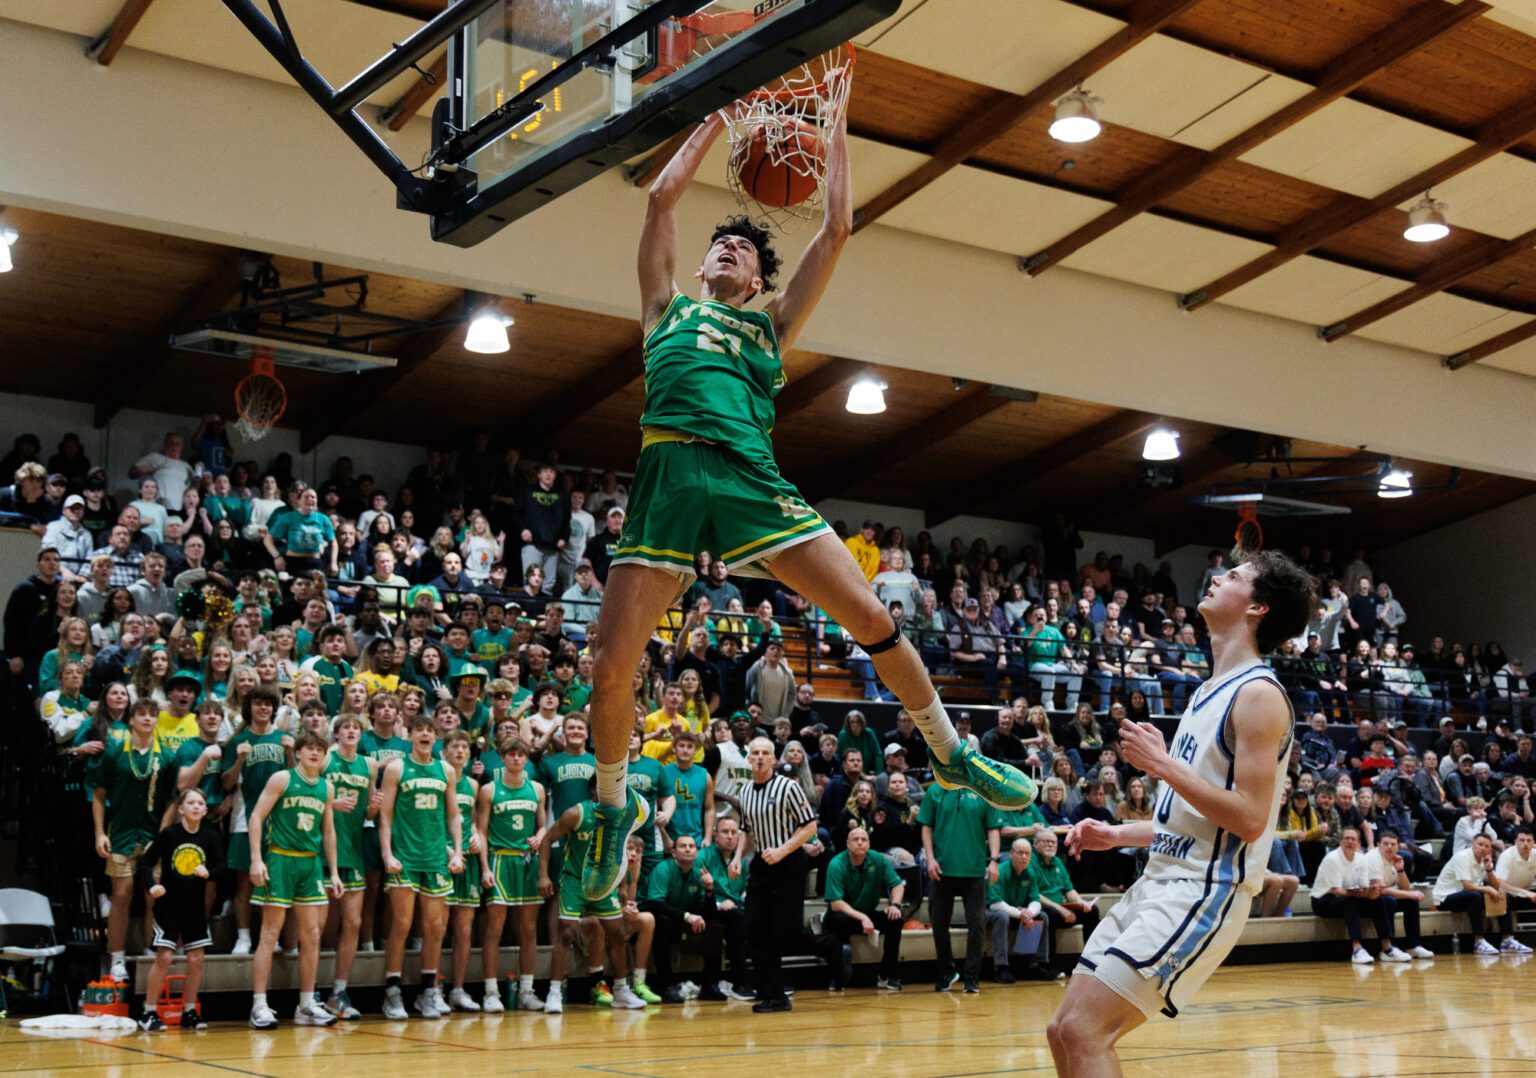 Lynden’s Anthony Canales slam dunks the ball in the fourth quarter Saturday, Feb. 3 as Lynden beat Lynden Christian 61-56 at Lynden Christian High School.